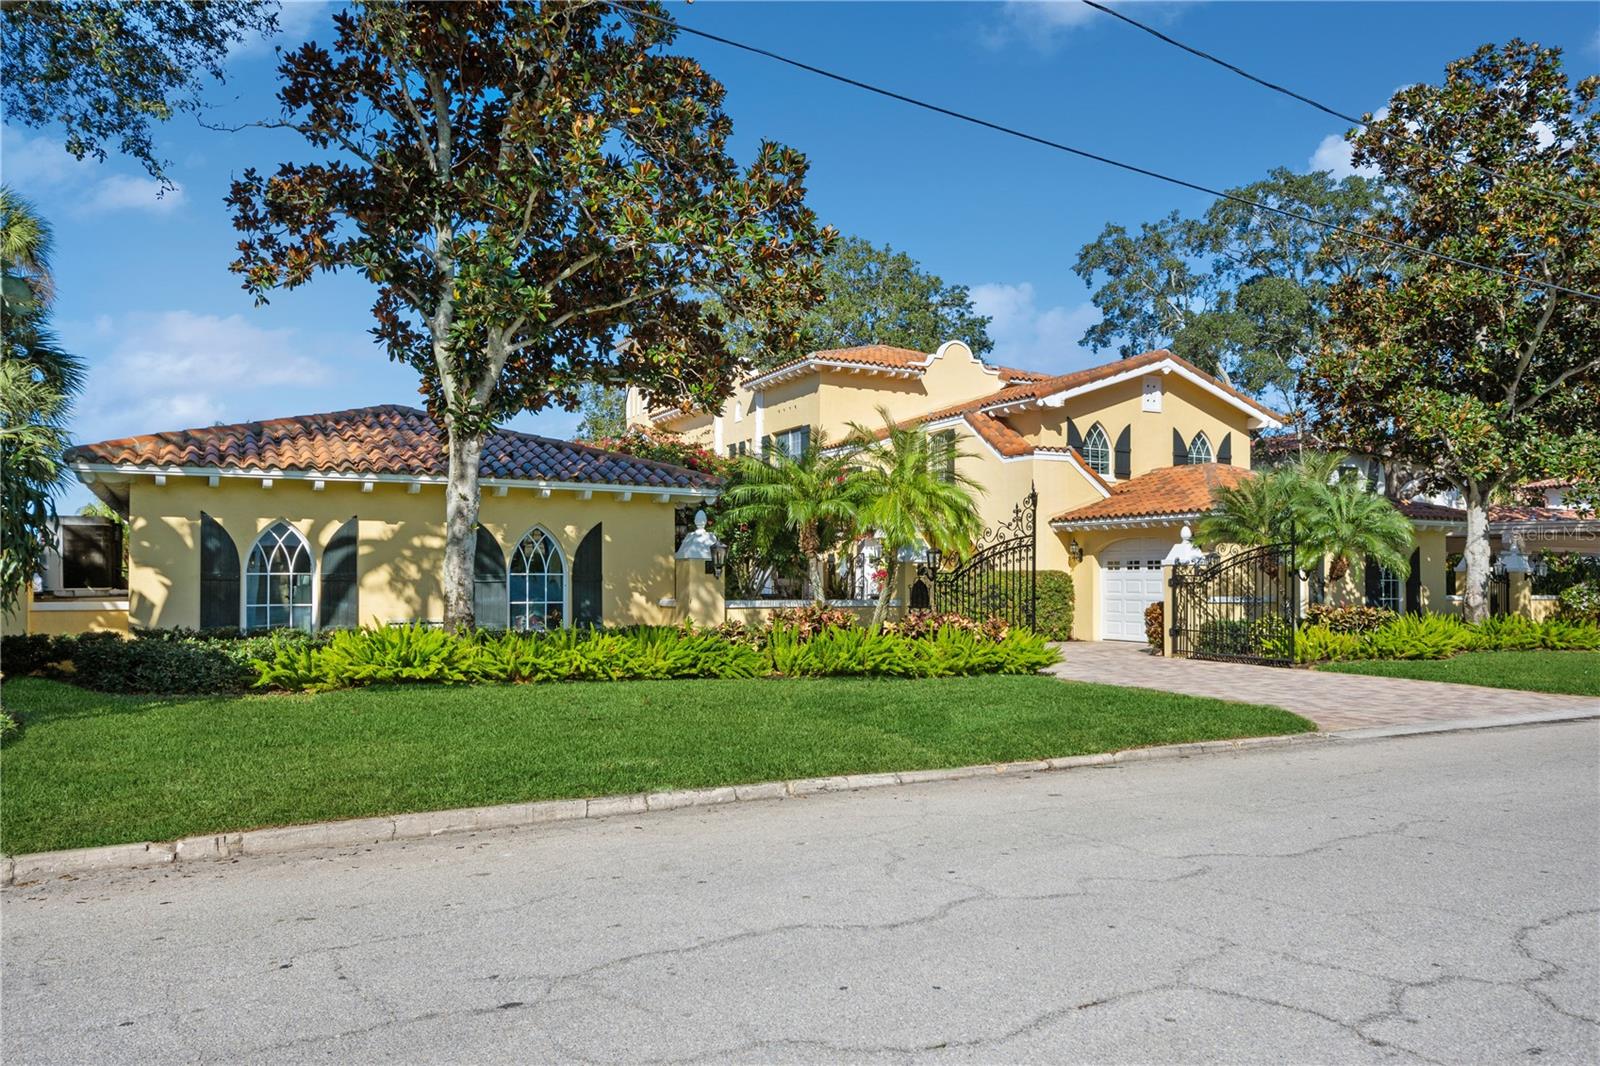 Exquisite Historical Home on Double Waterfront Lot!